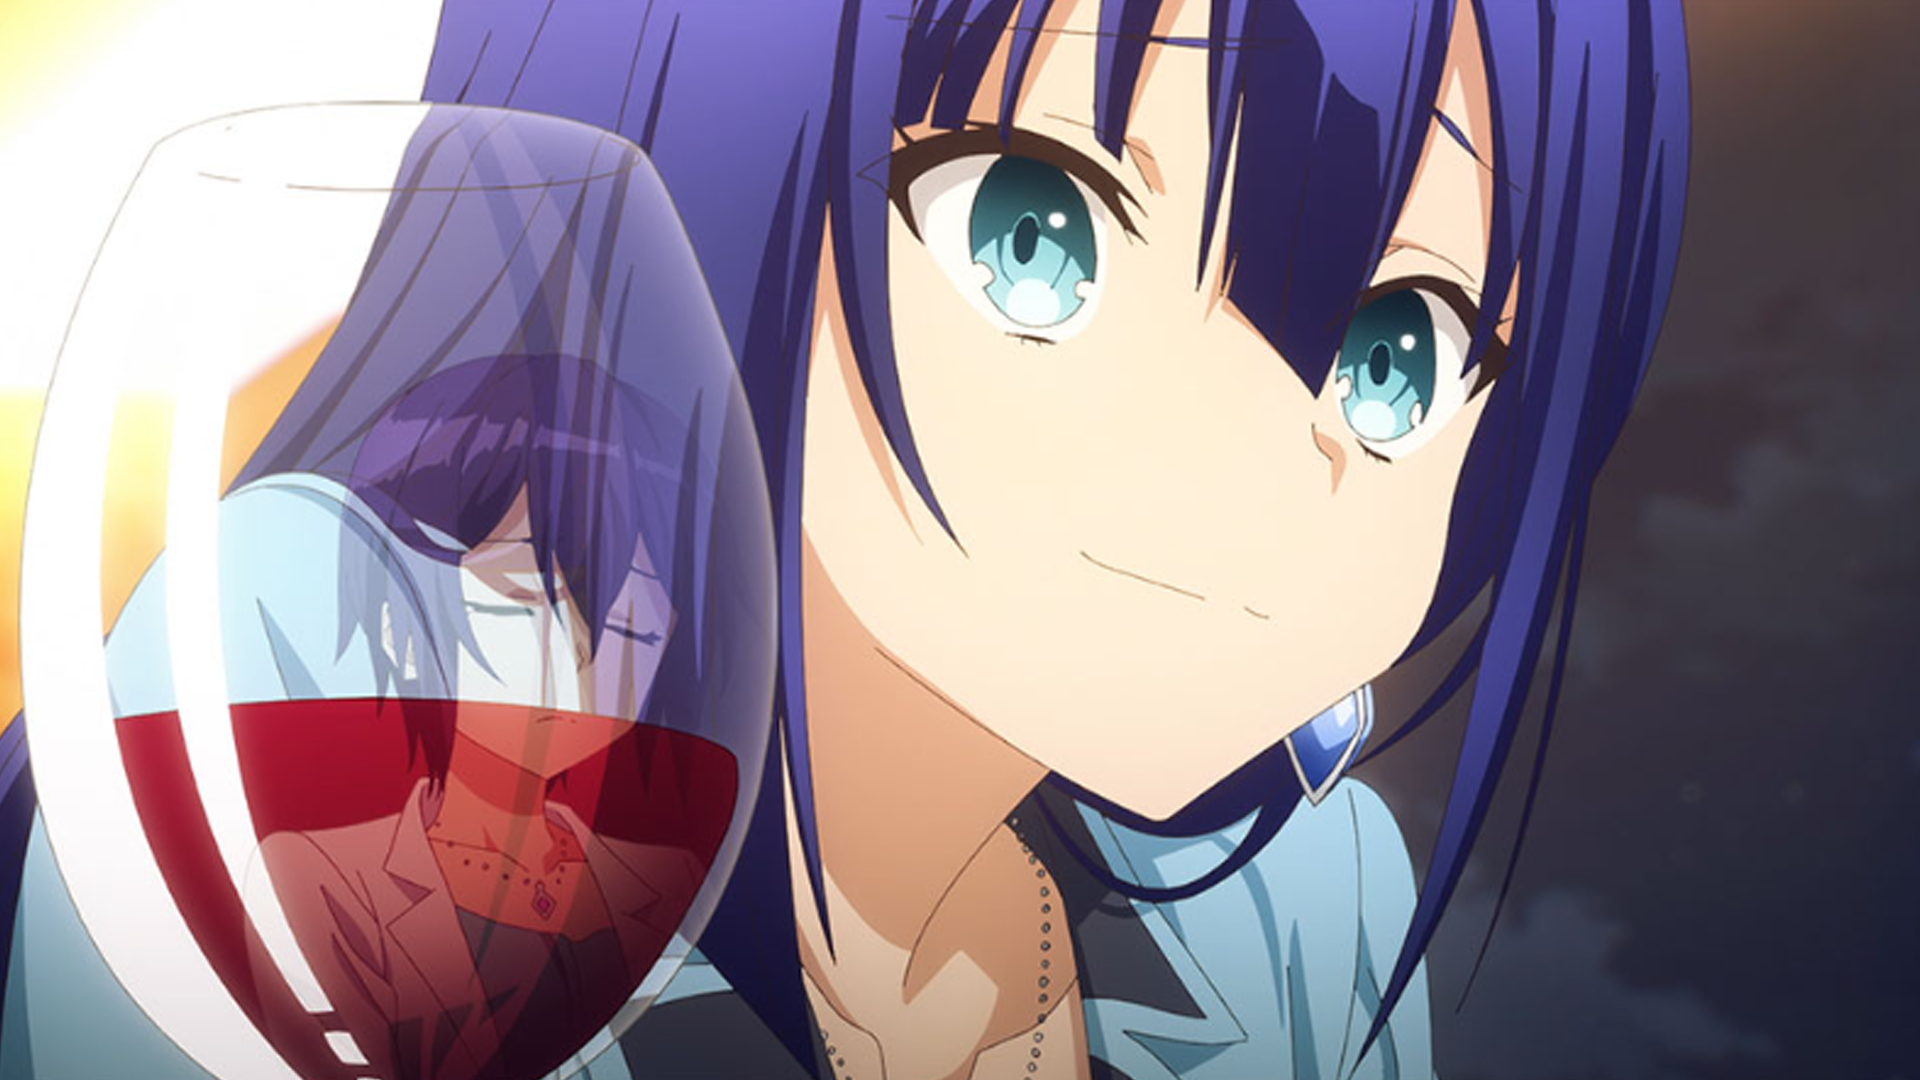 Engage Kiss Episode 4 Preview Released - Anime Corner